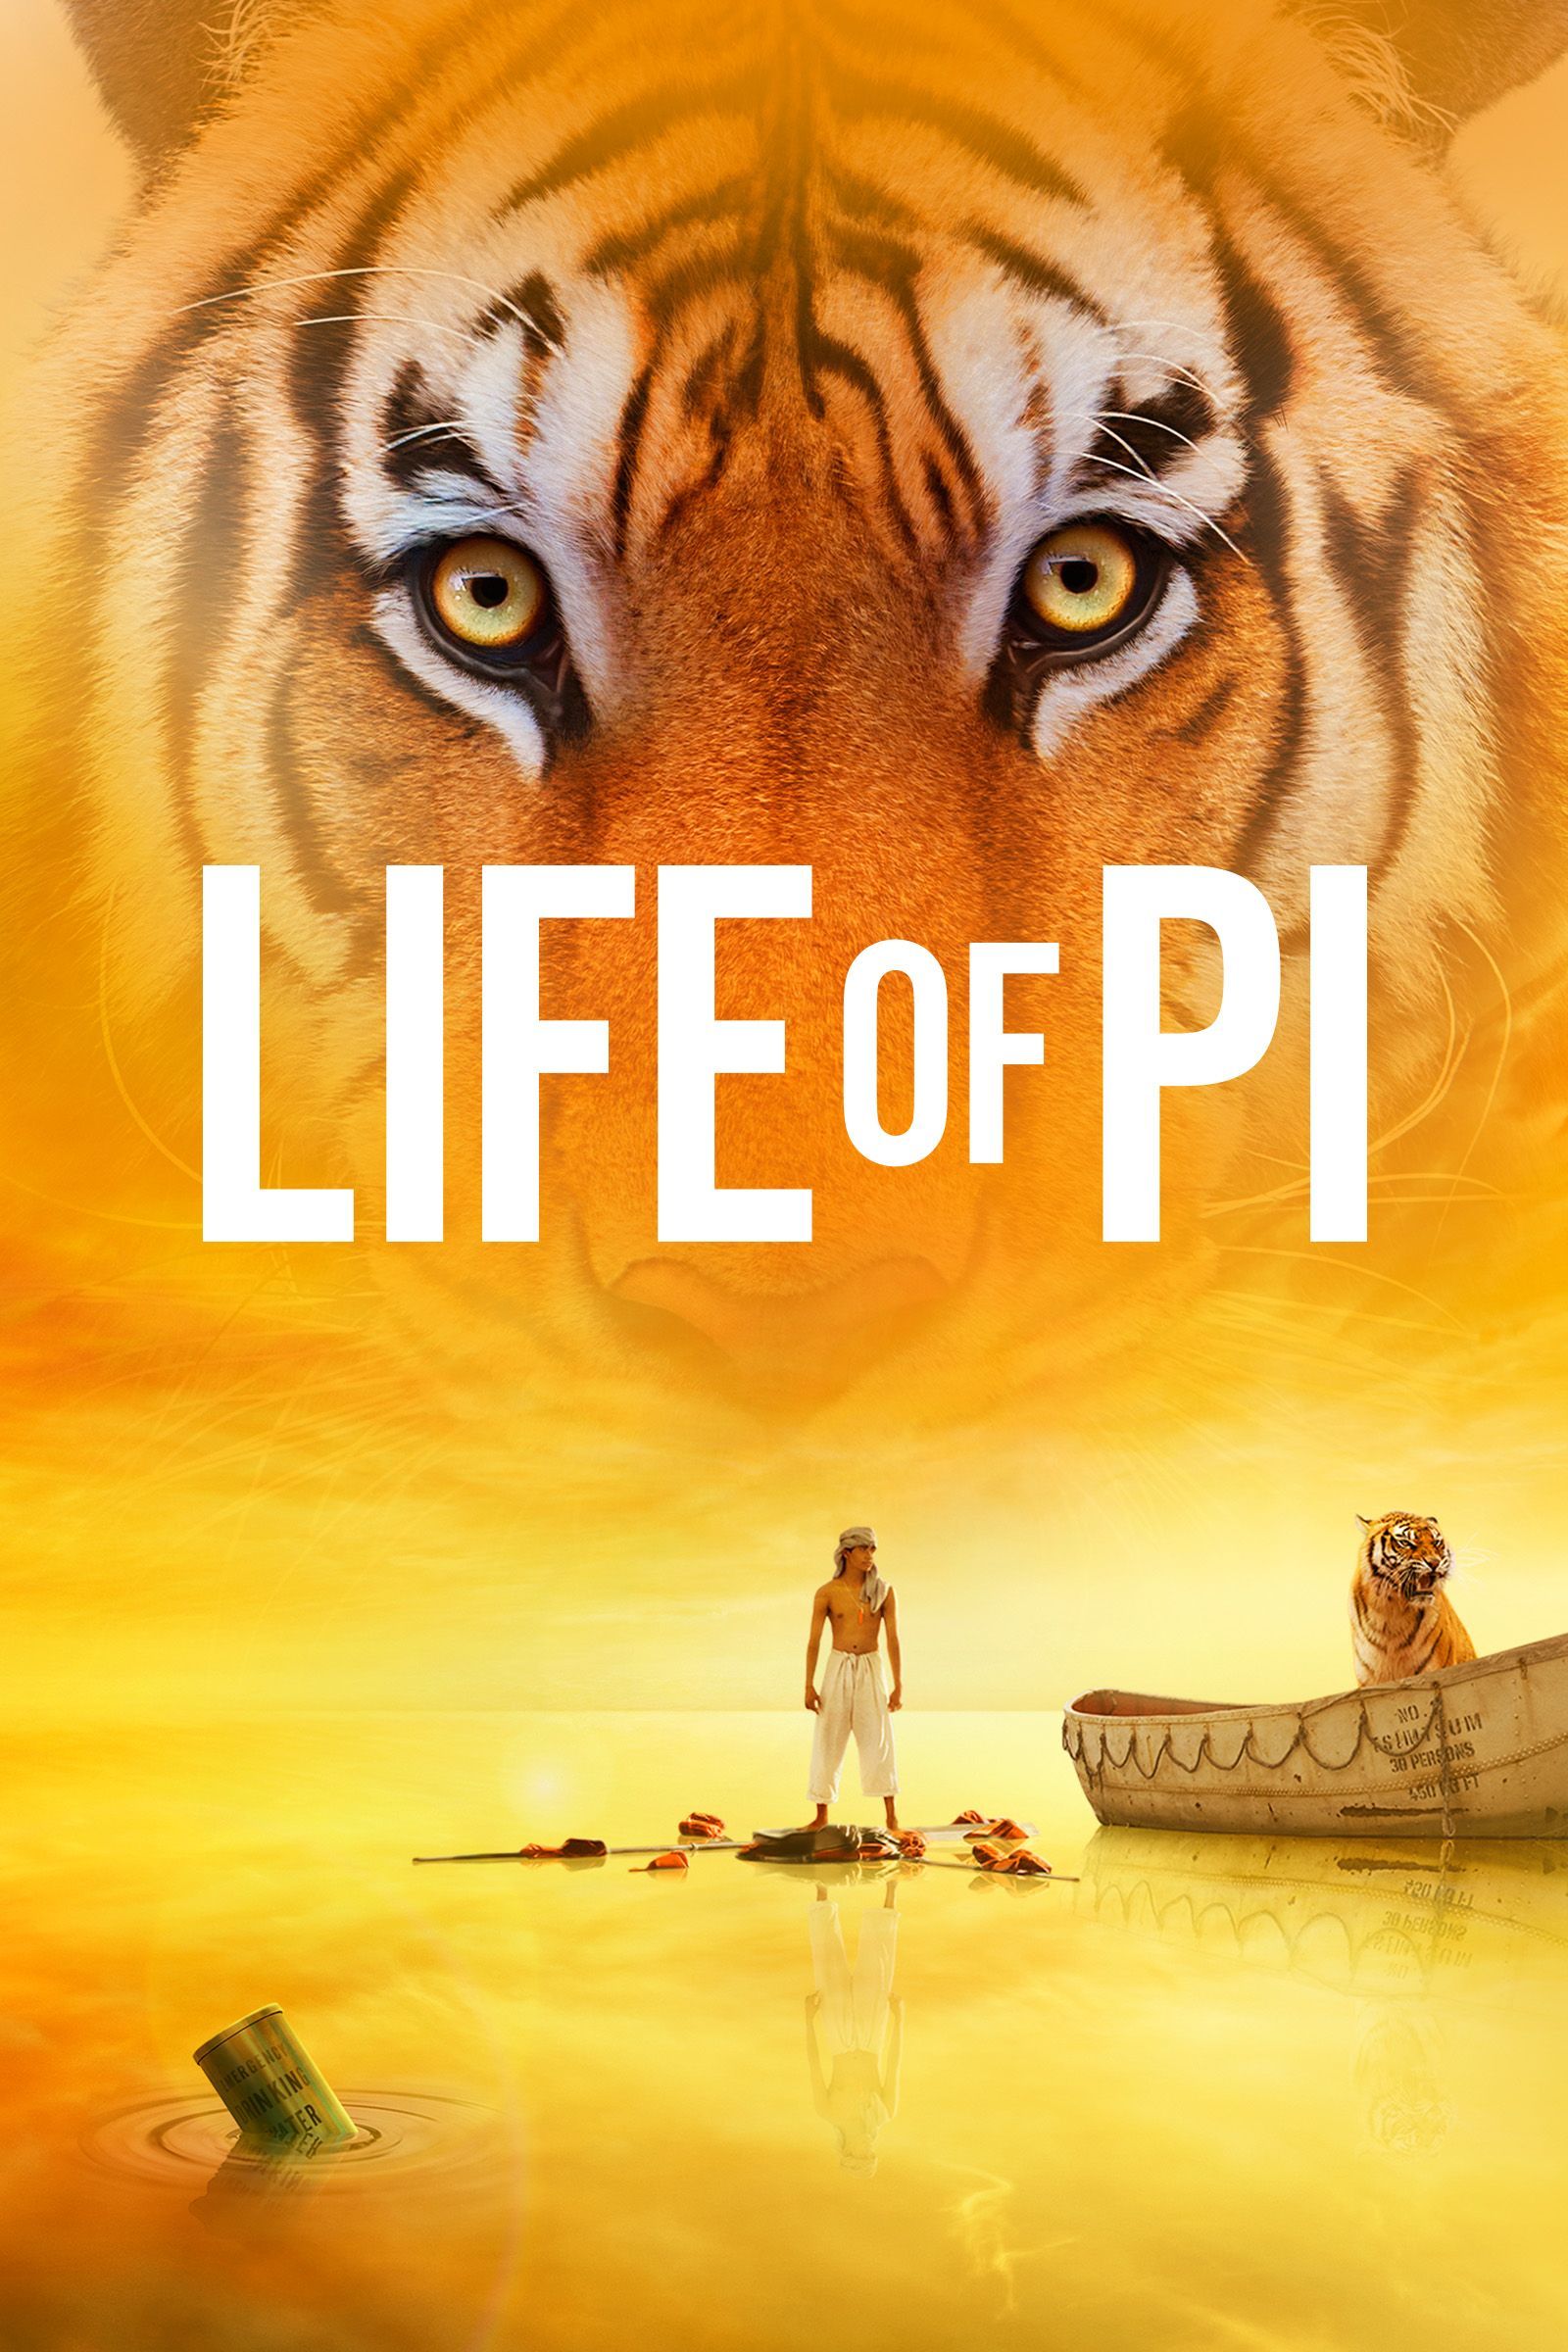 Life of Pi film poster art with a tiger looming over the water